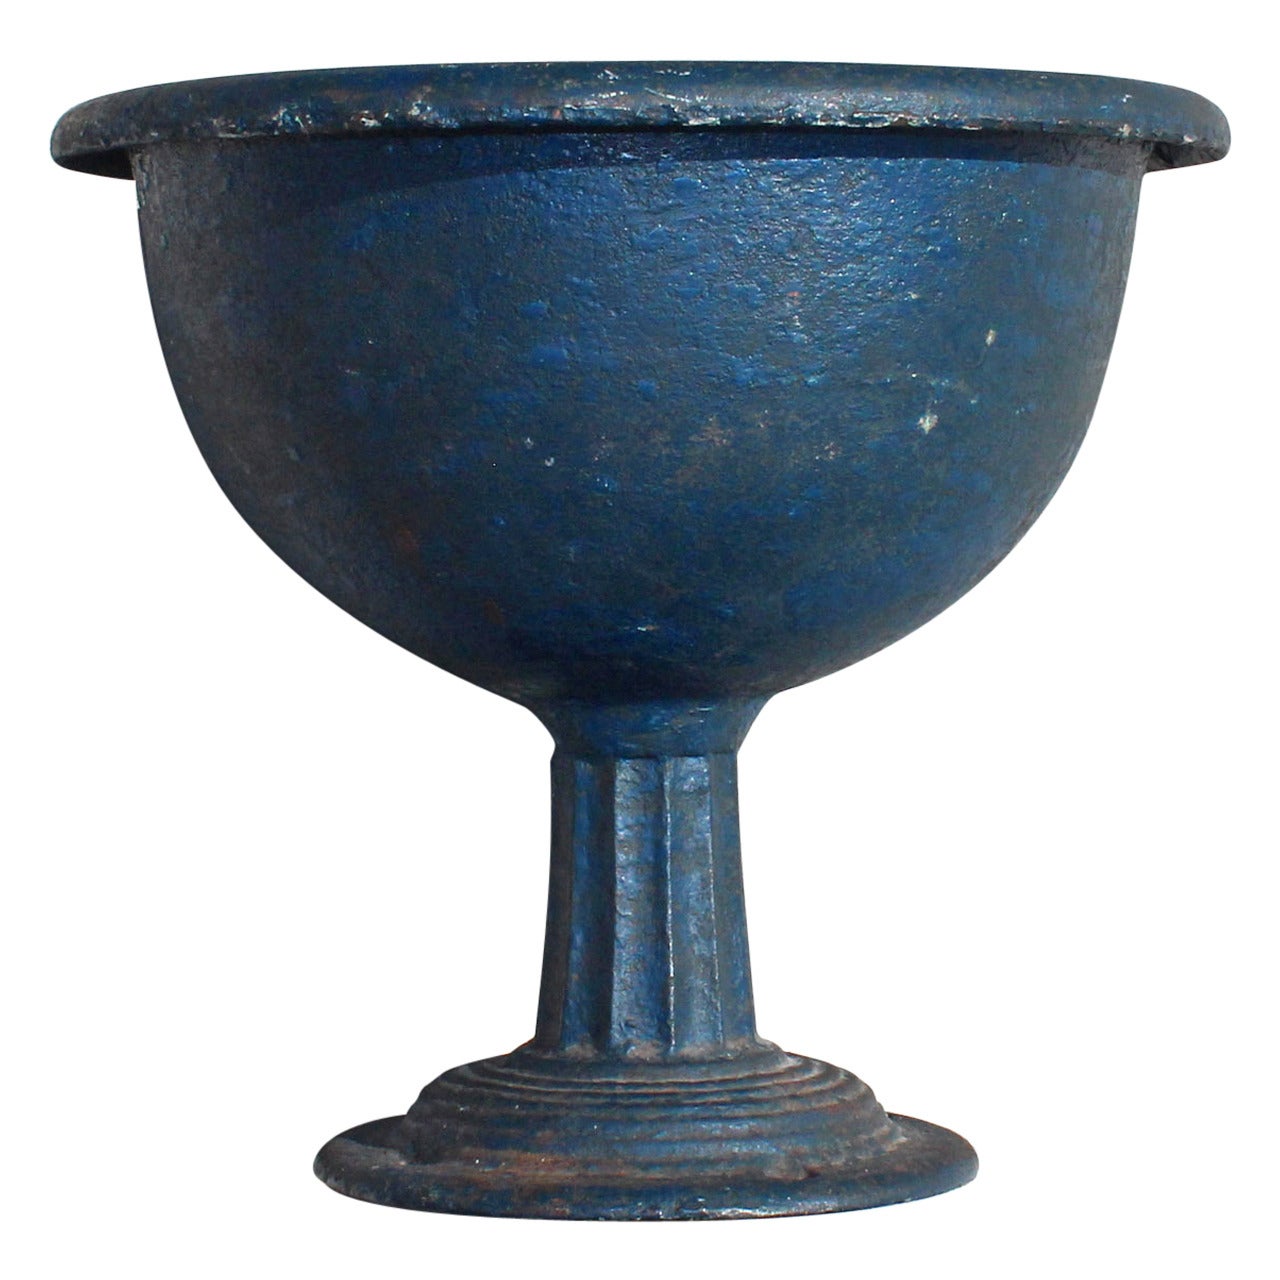 Blue Painted Cast Iron Compote, American, 19th Century